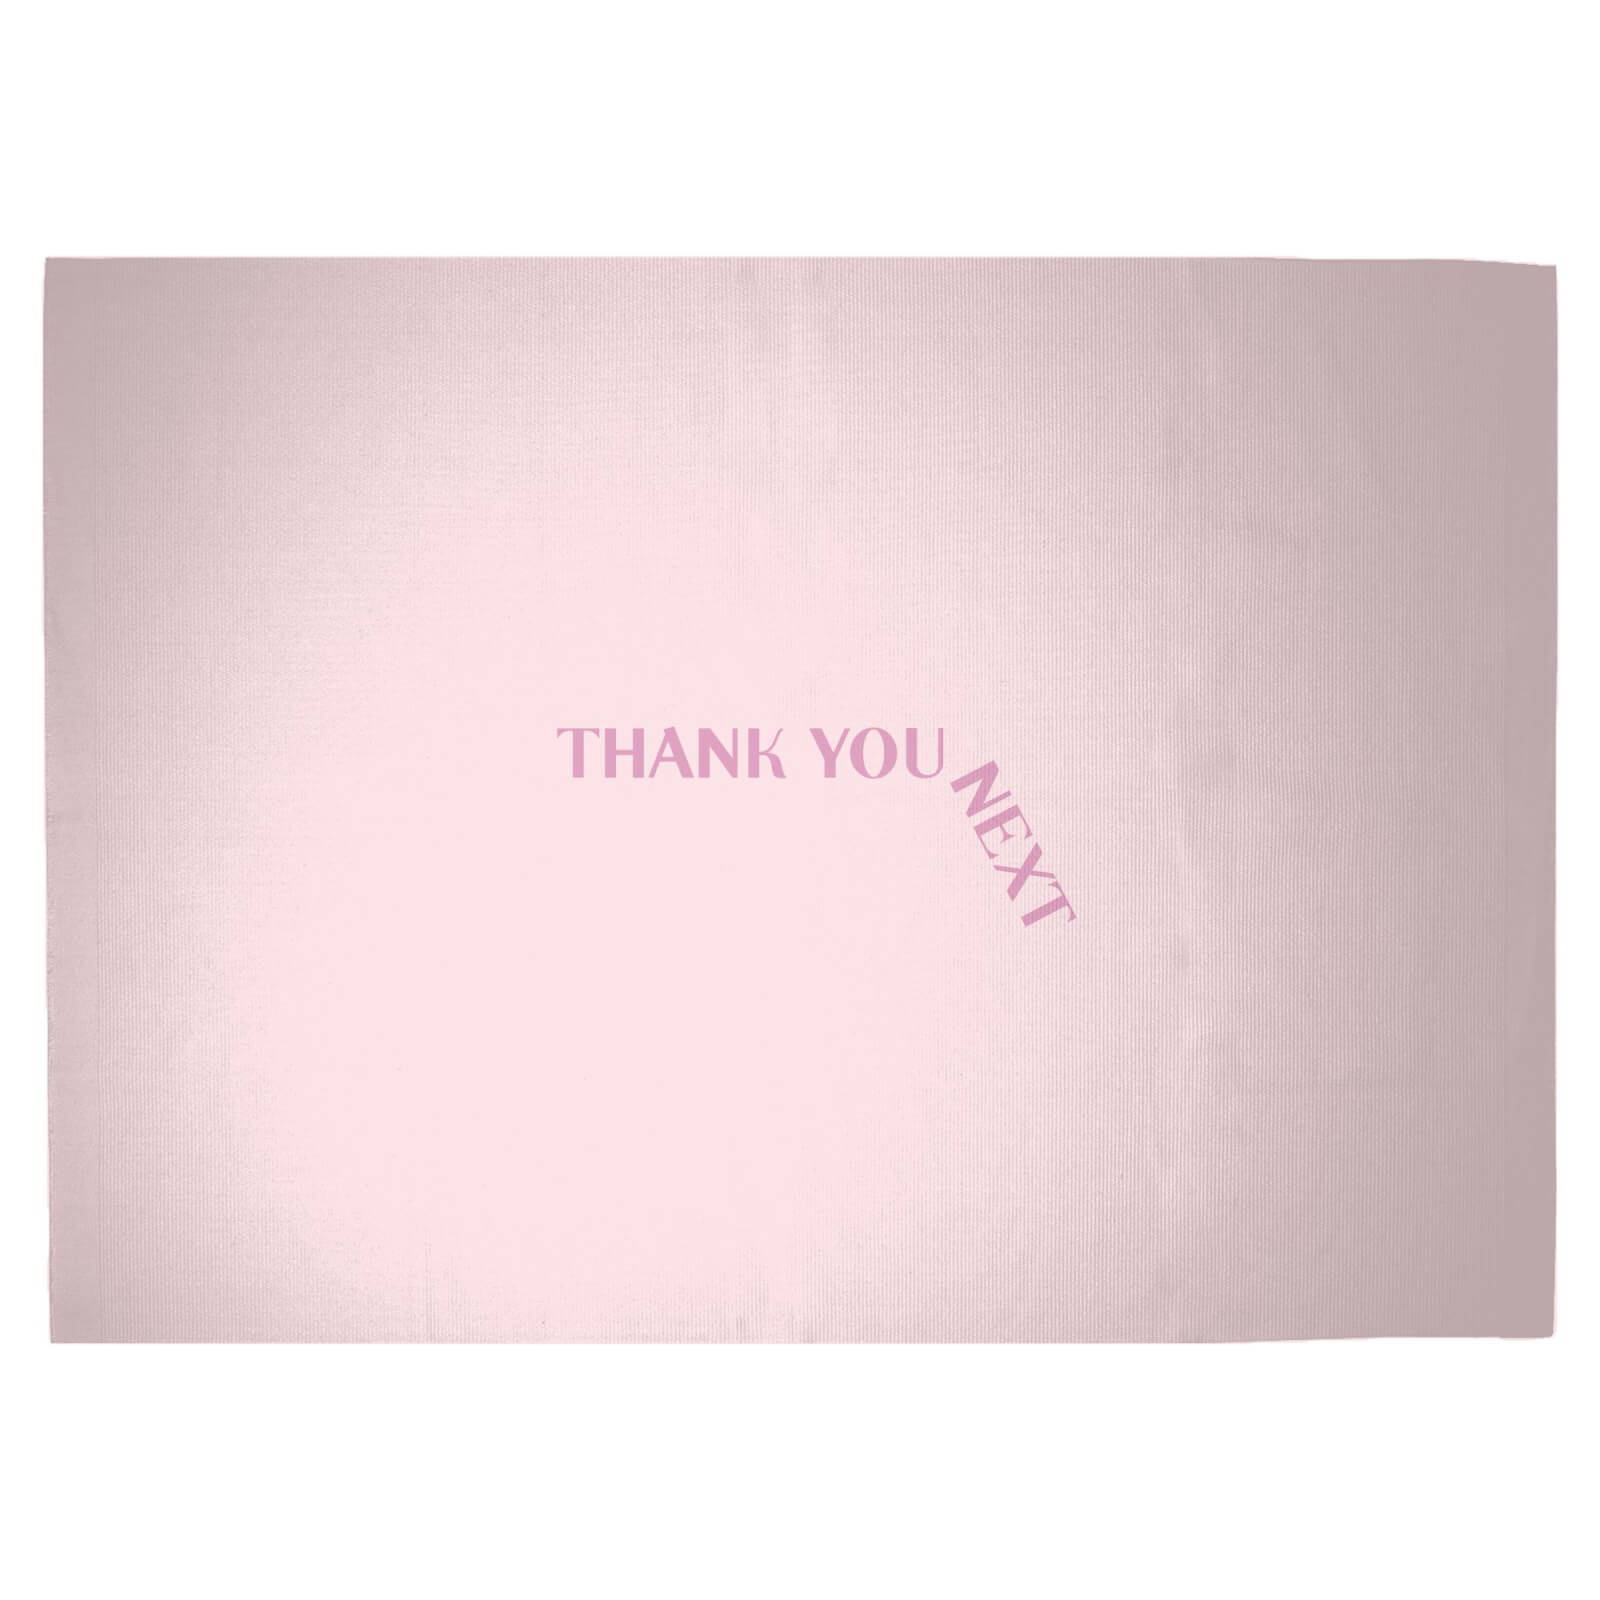 Thank You Next Woven Rug - Large